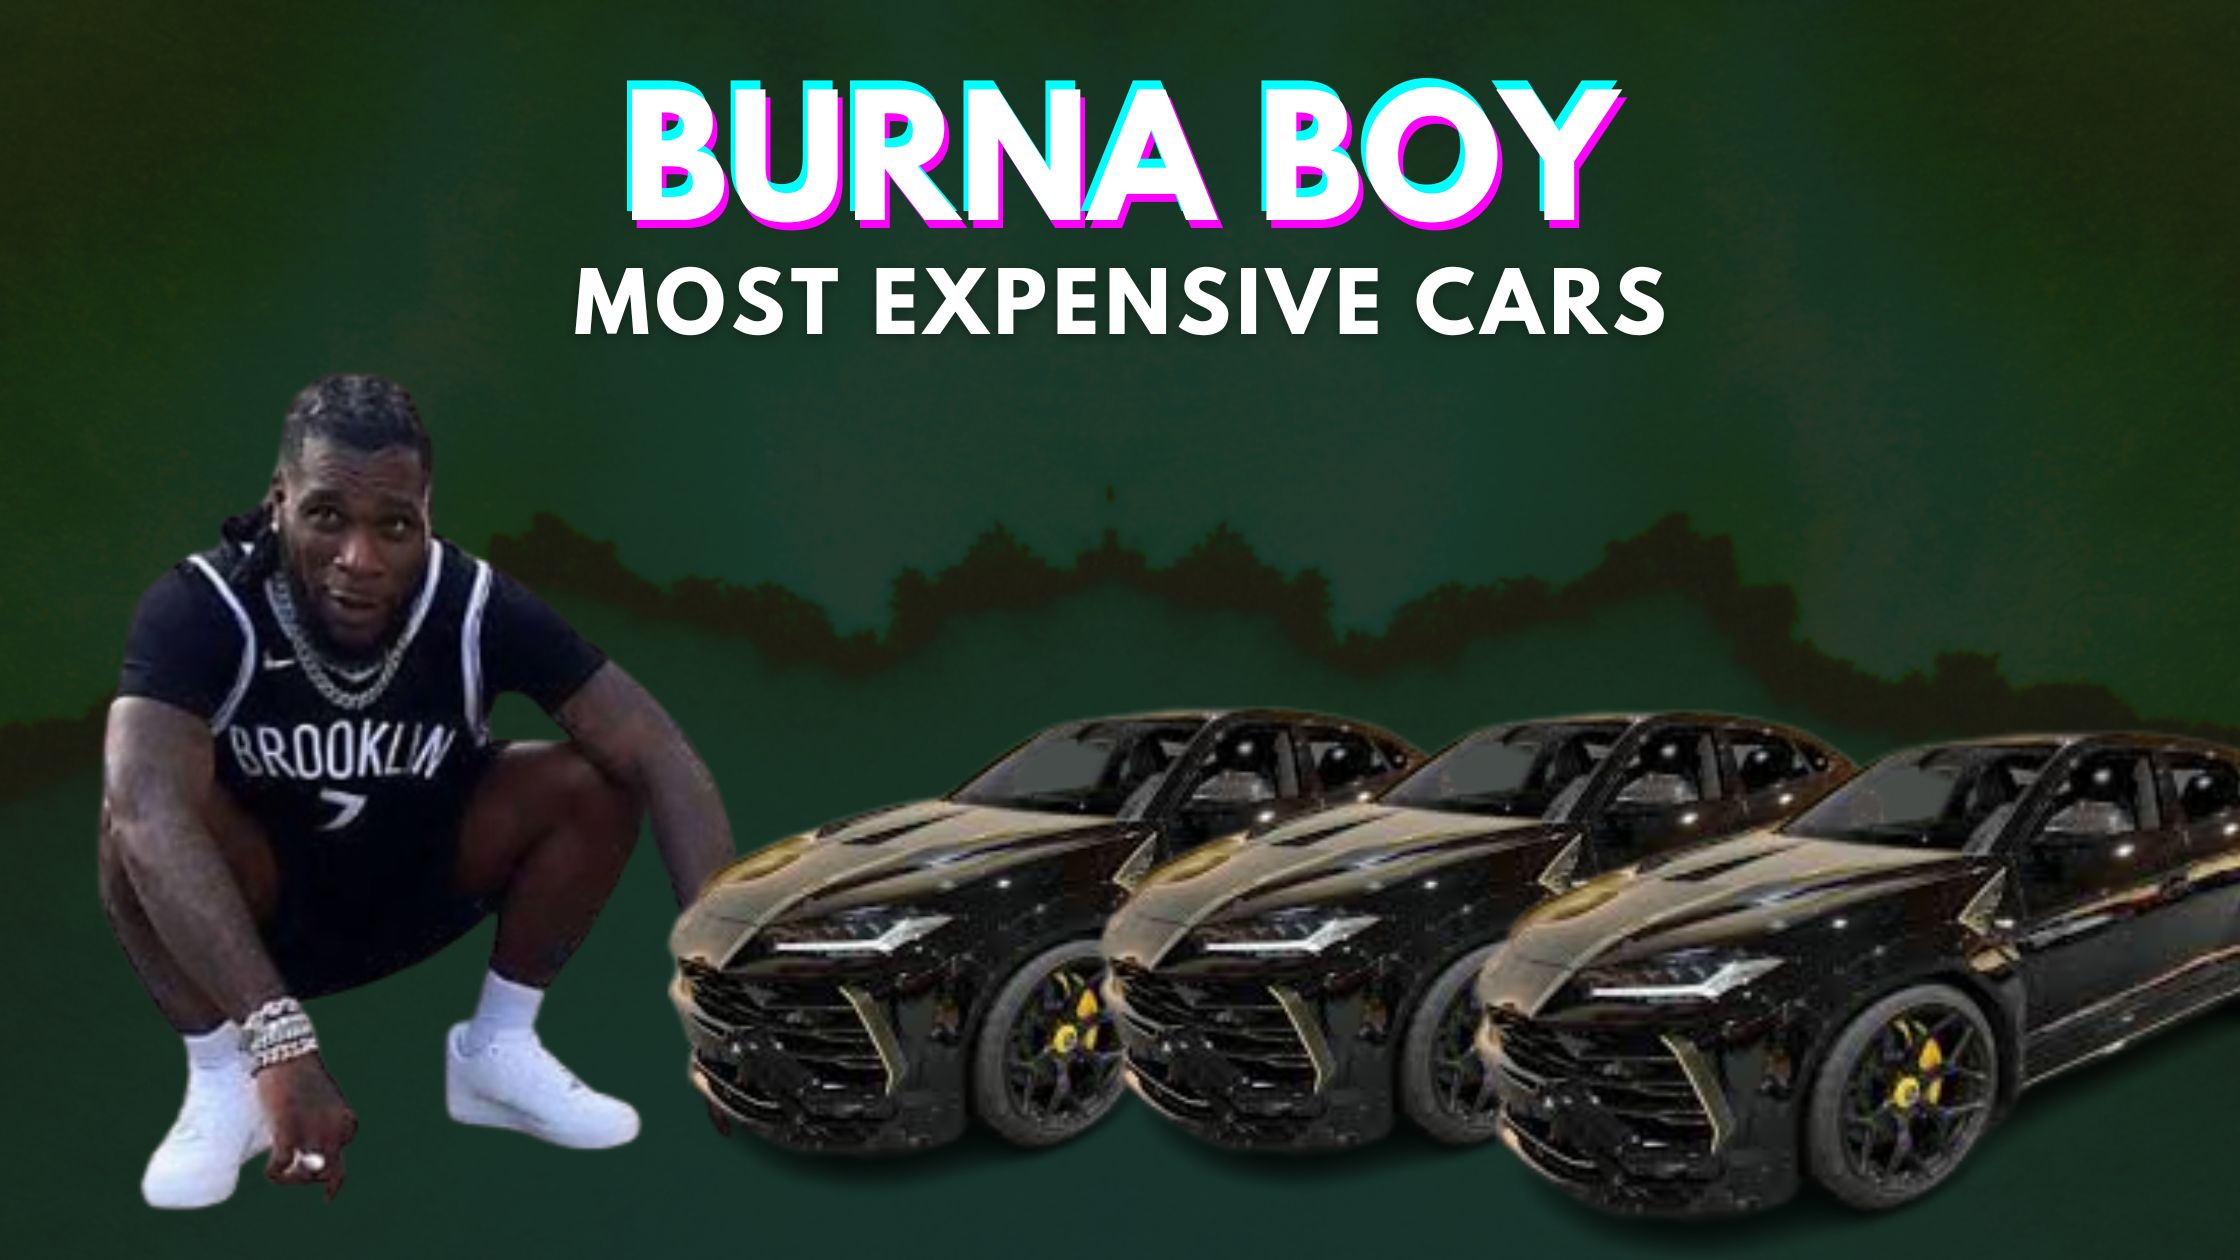 Burna Boy Most Expensive Cars: Top 7